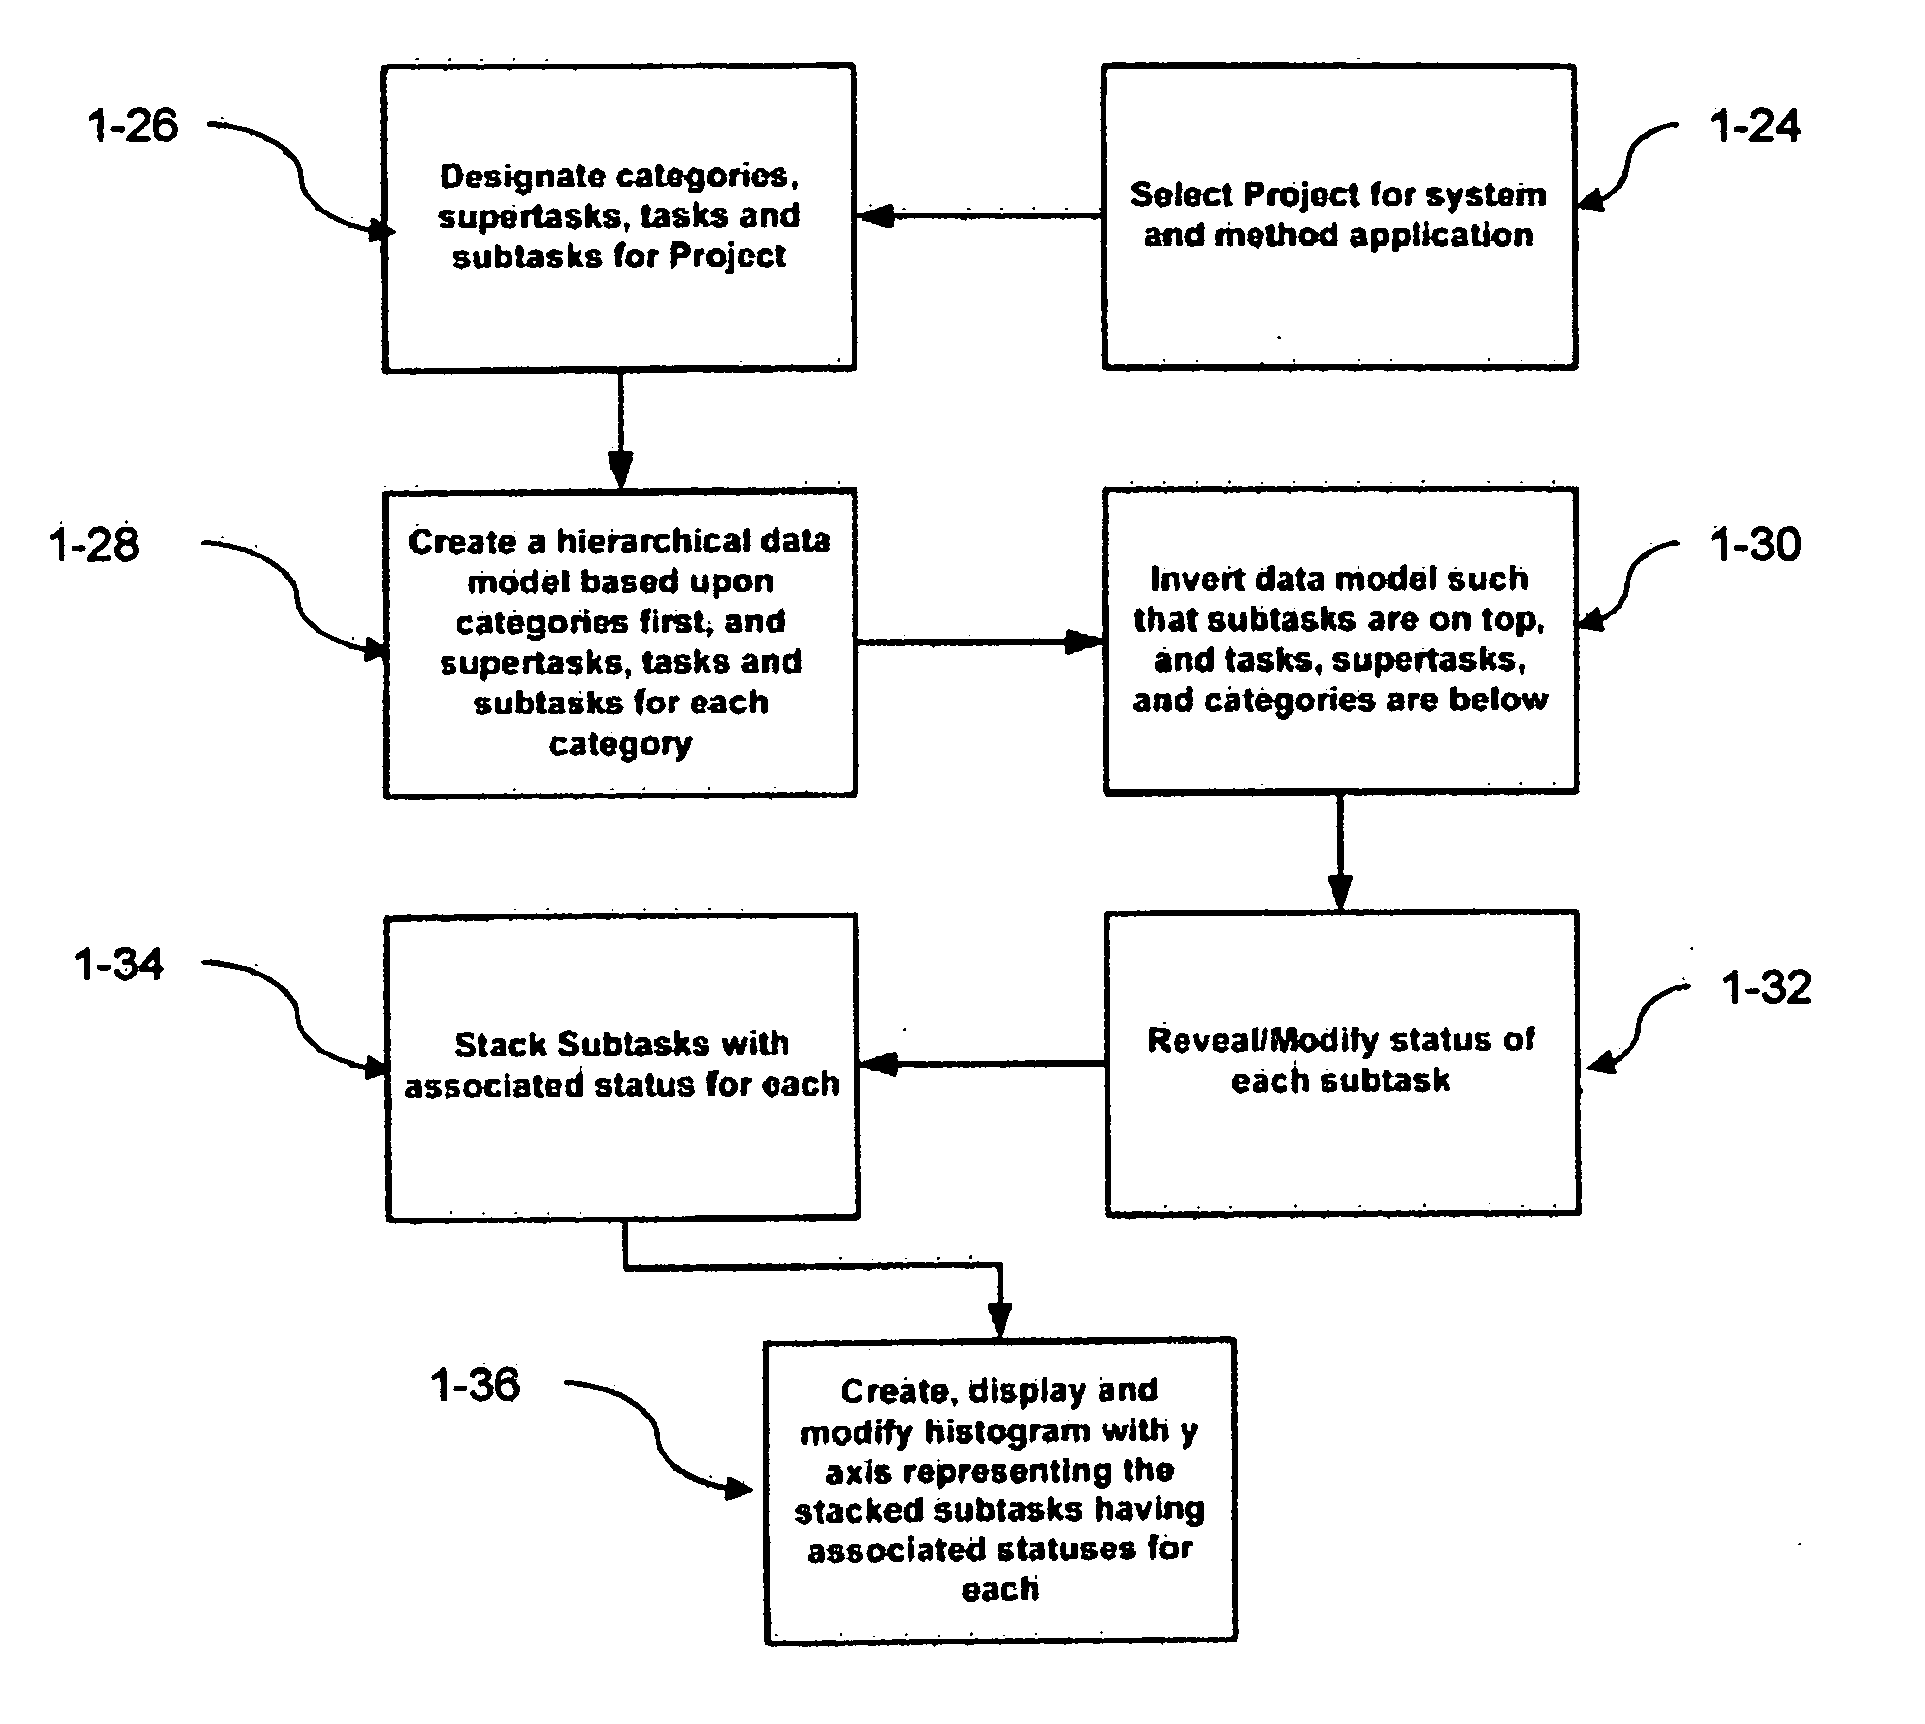 System and method for visually organizing, prioritizing and updating information